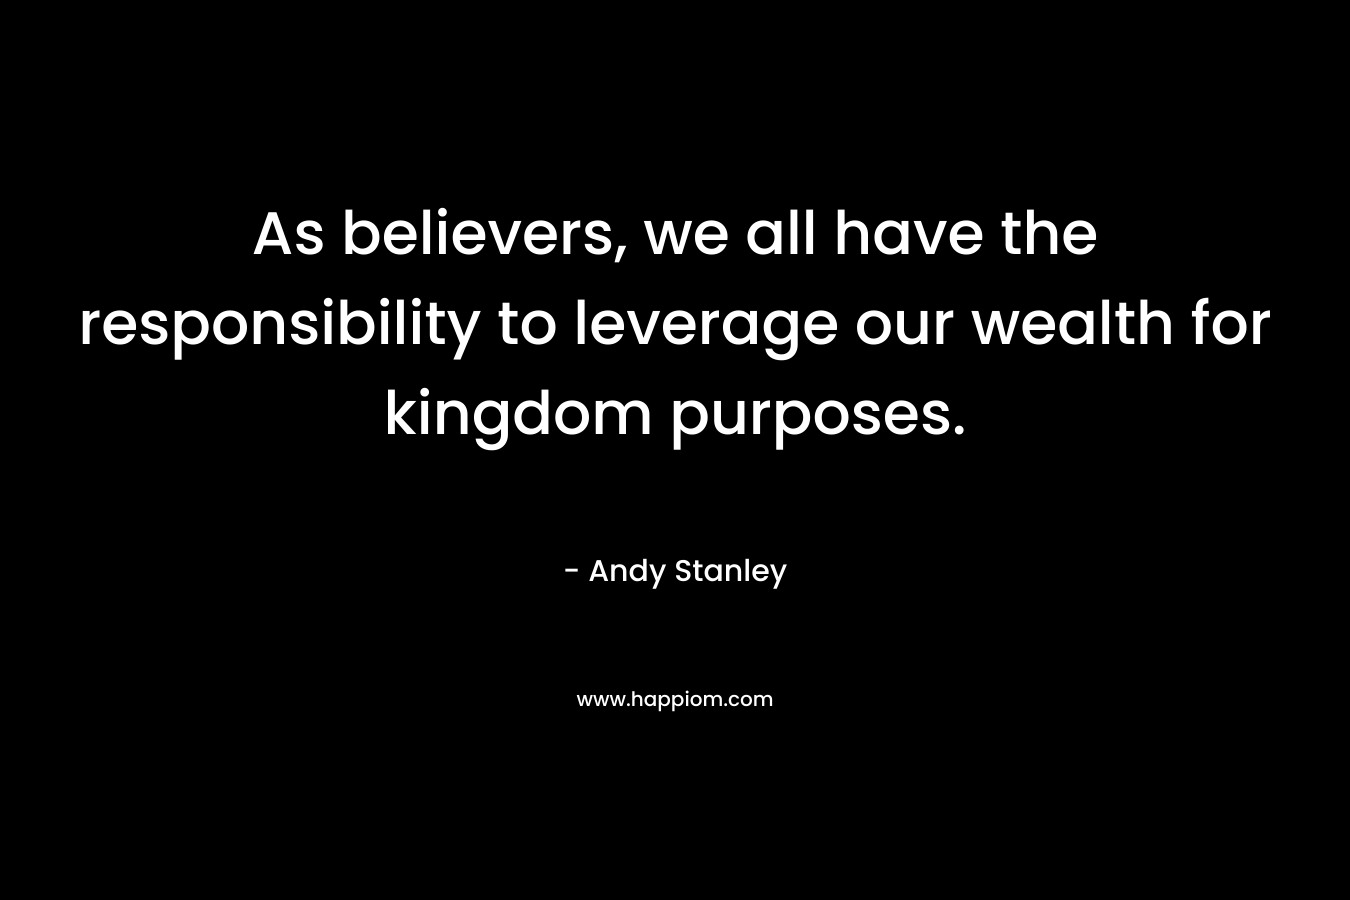 As believers, we all have the responsibility to leverage our wealth for kingdom purposes. – Andy Stanley